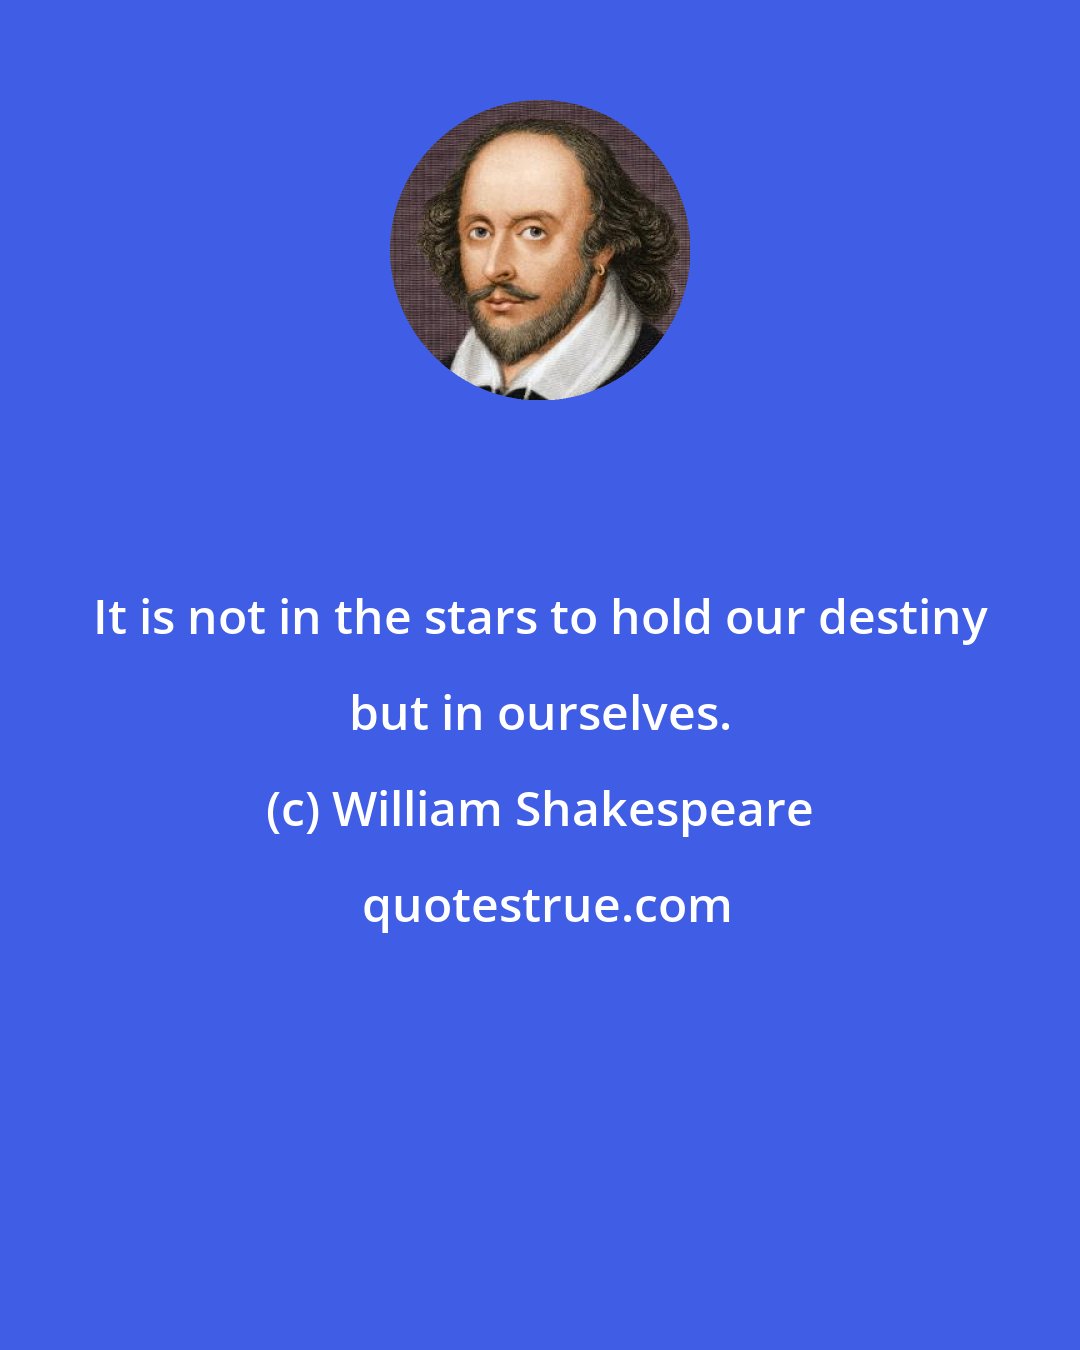 William Shakespeare: It is not in the stars to hold our destiny but in ourselves.